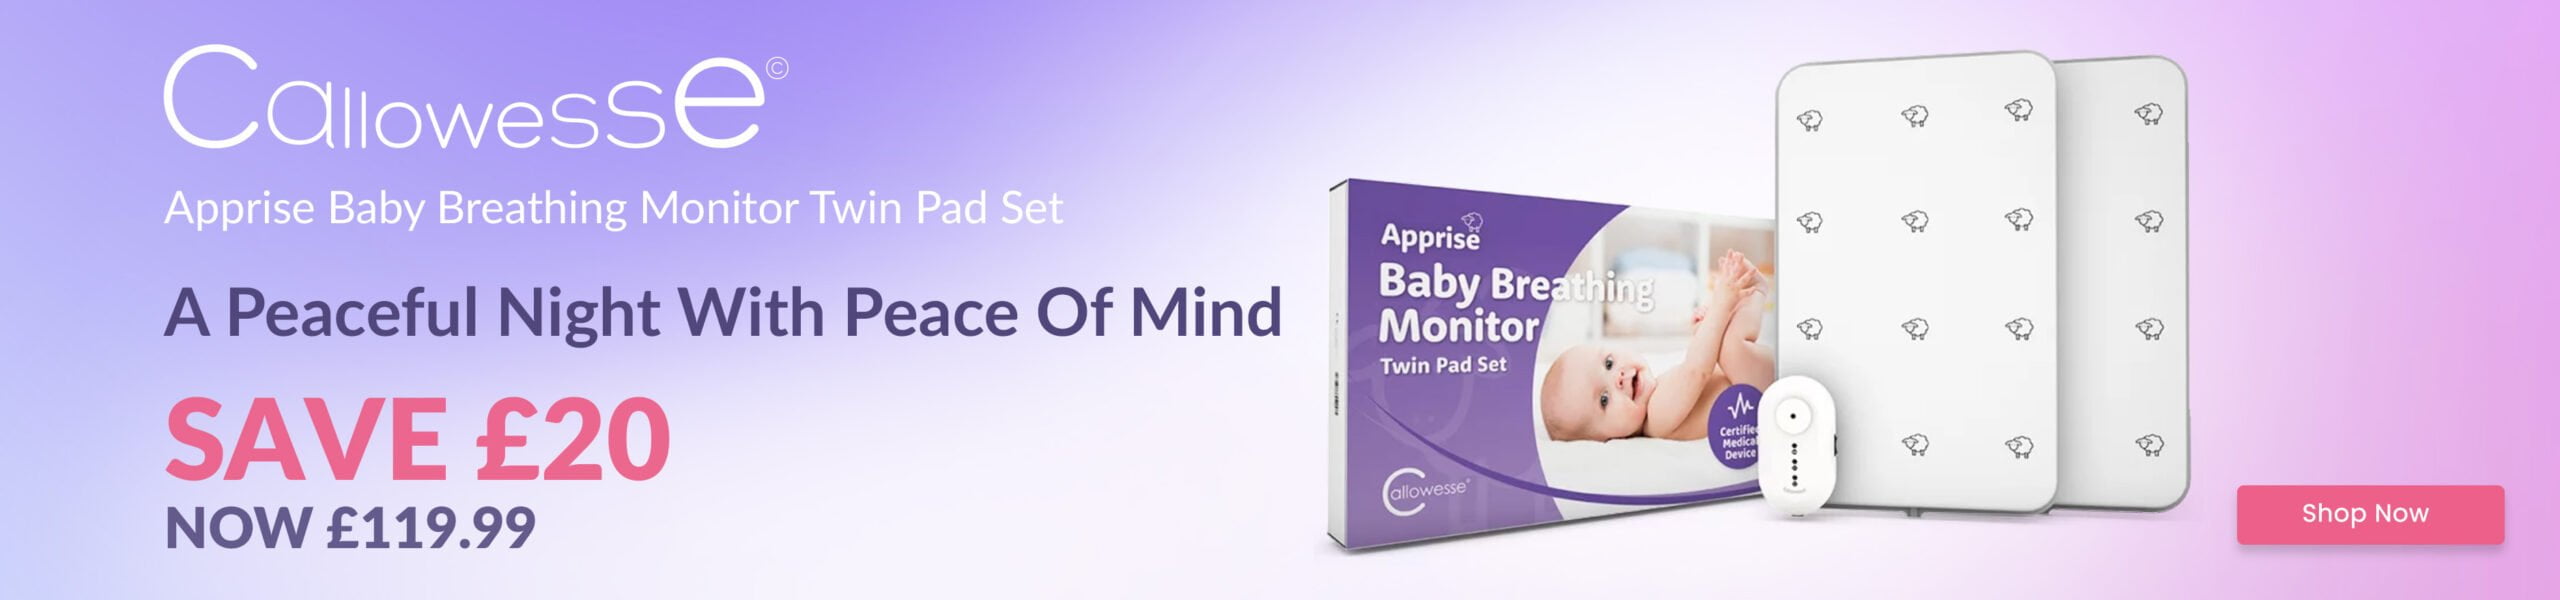 Apprise Baby Breathing Monitor Twin pad